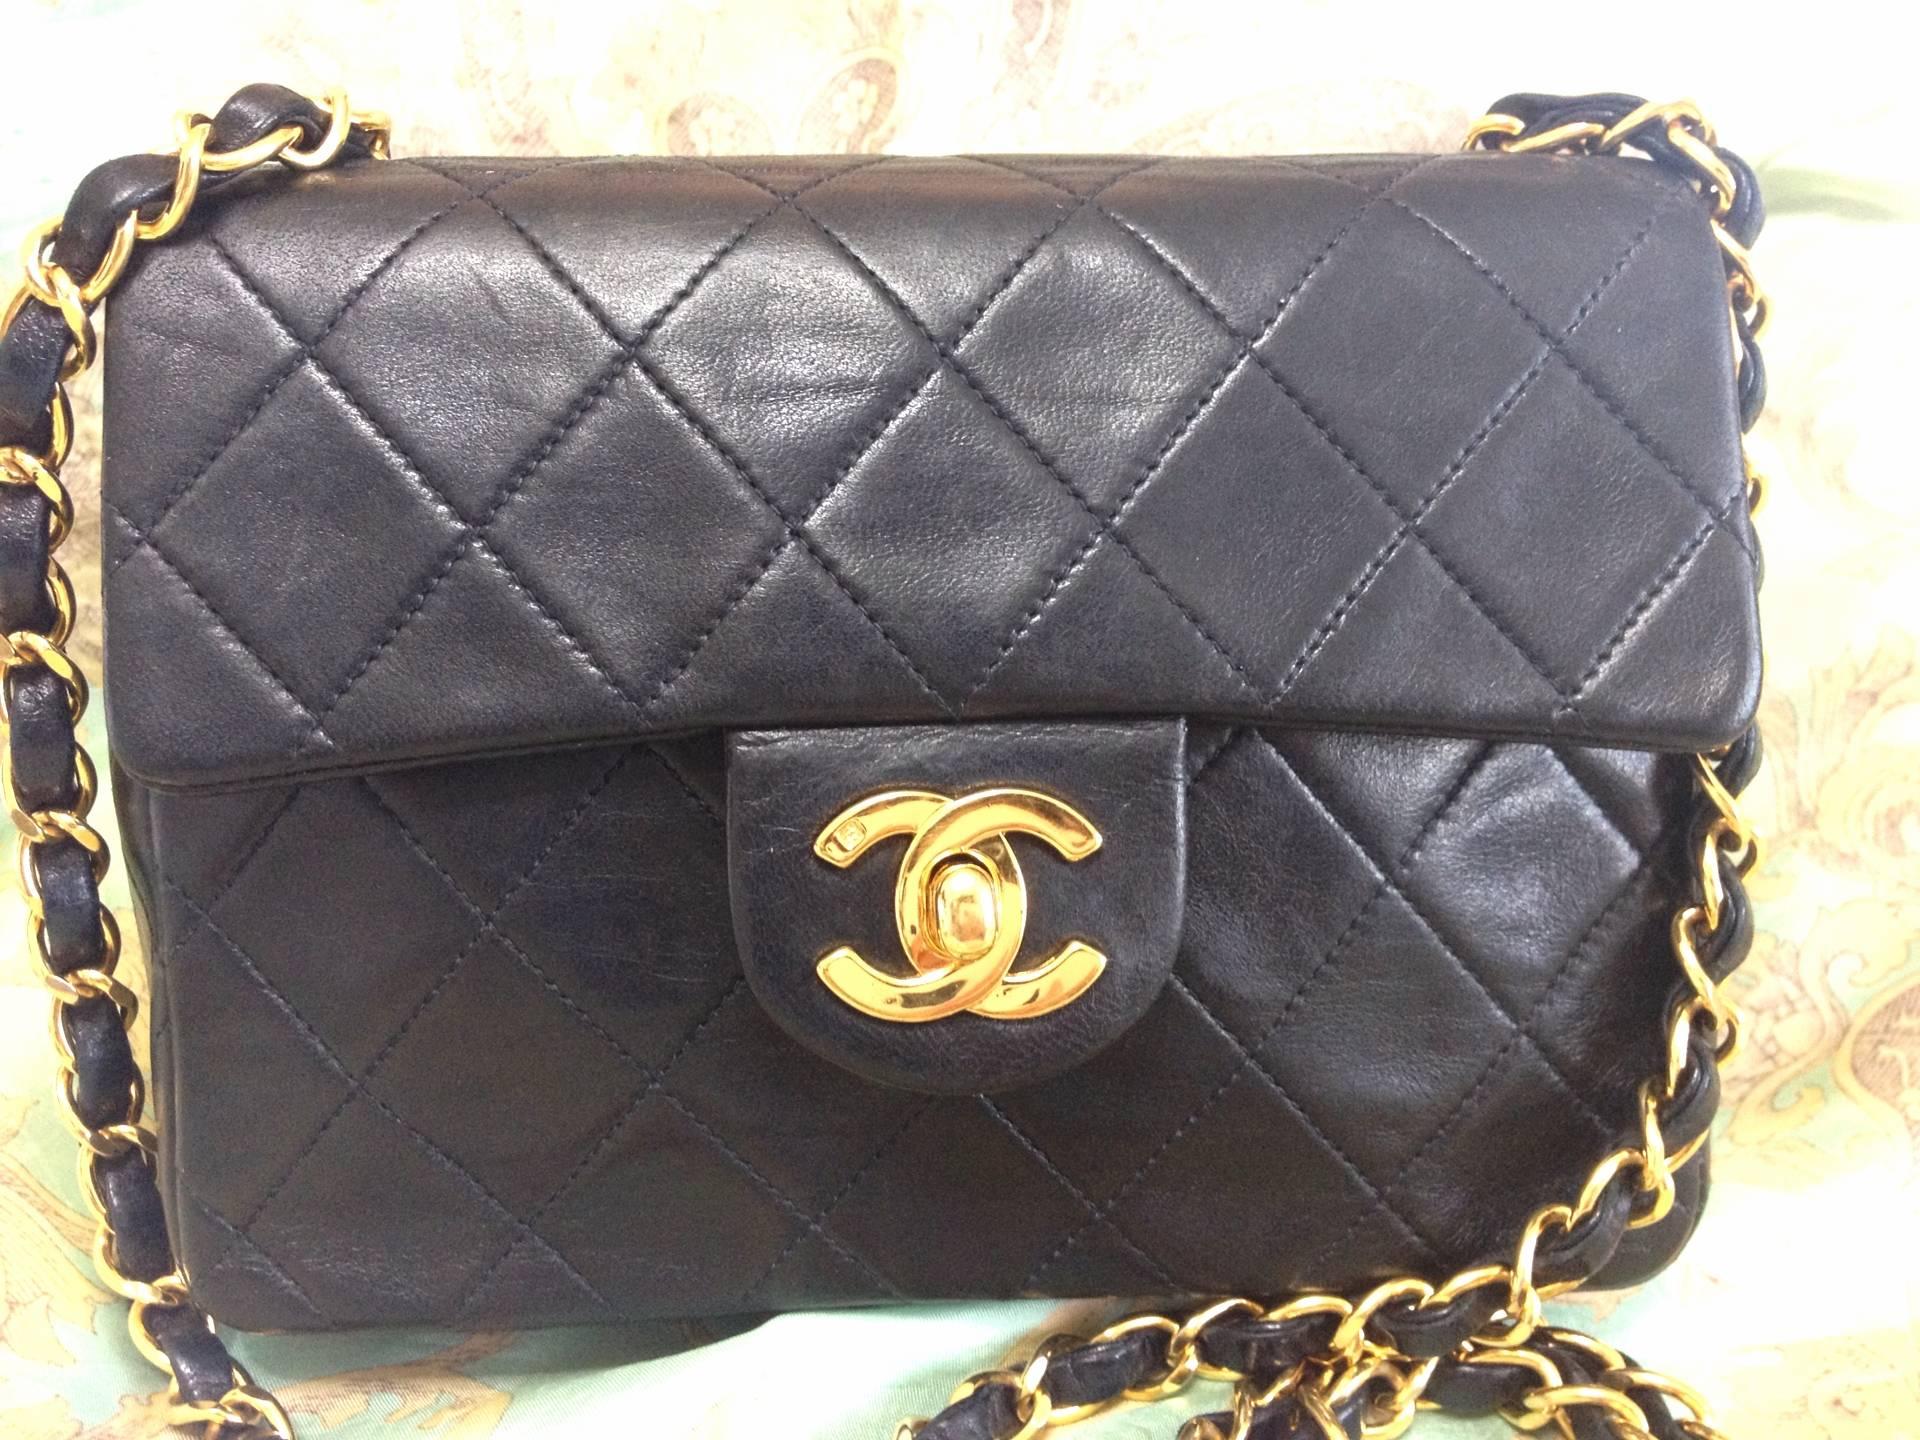 Vintage CHANEL black lamb leather flap chain shoulder bag, classic 2.55 mini purse with gold tone CC closure.

Vintage CHANEL black color lambskin classic 2.55 mini shoulder bag with golden chains and cc closure.

Introducing one of the most